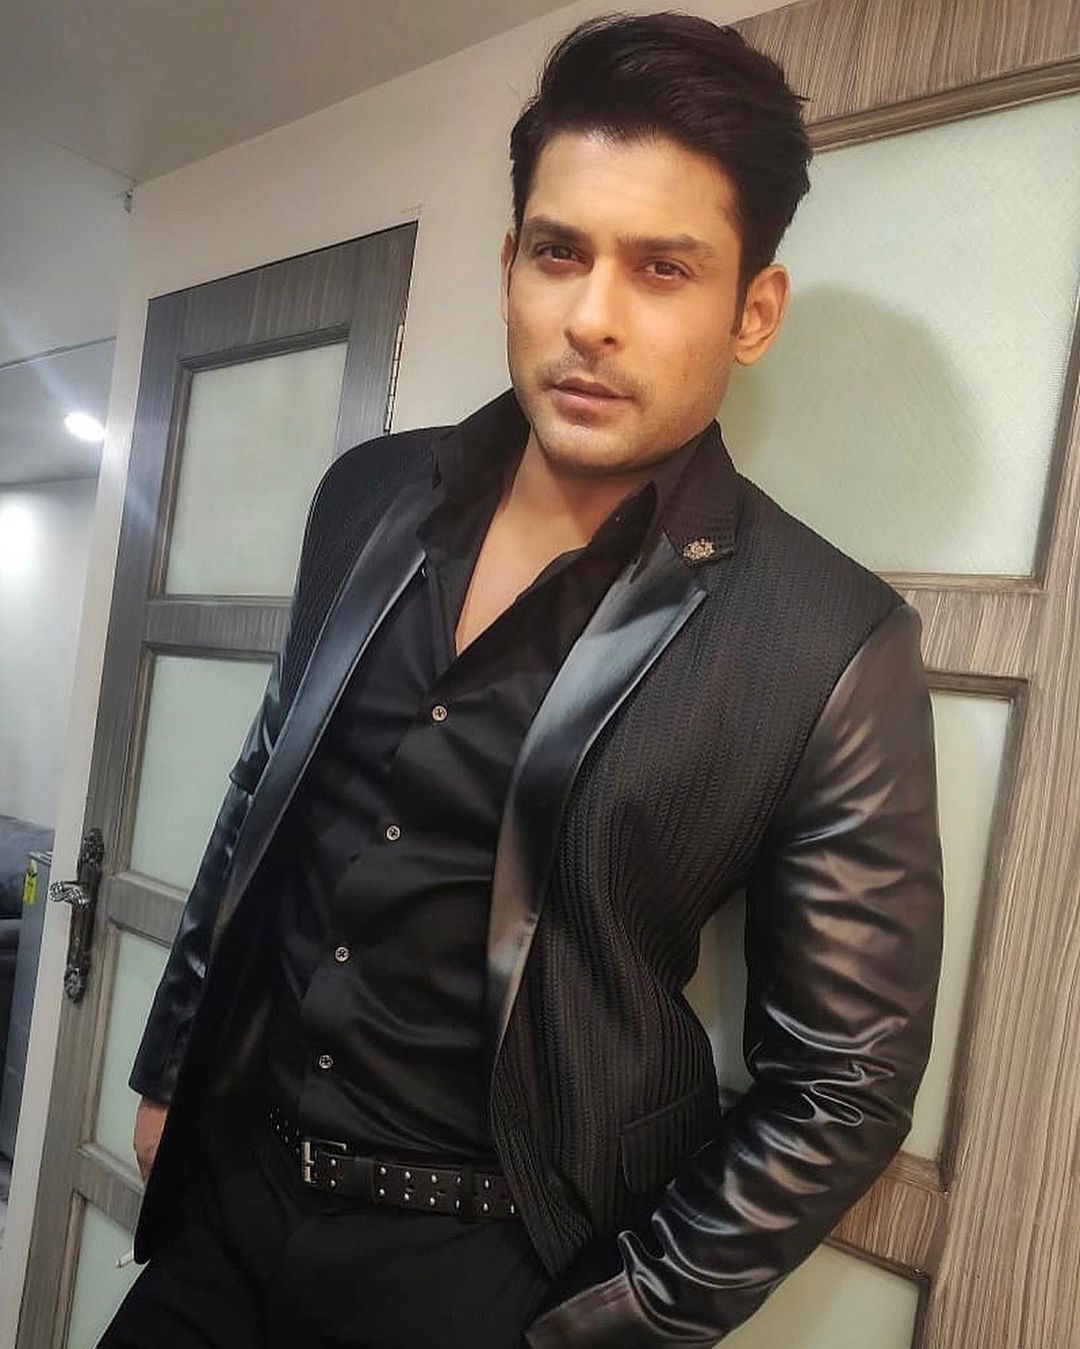 Sidharth Shukla death: Family suspects no foul play, tells Mumbai Police actor was under no mental pressure